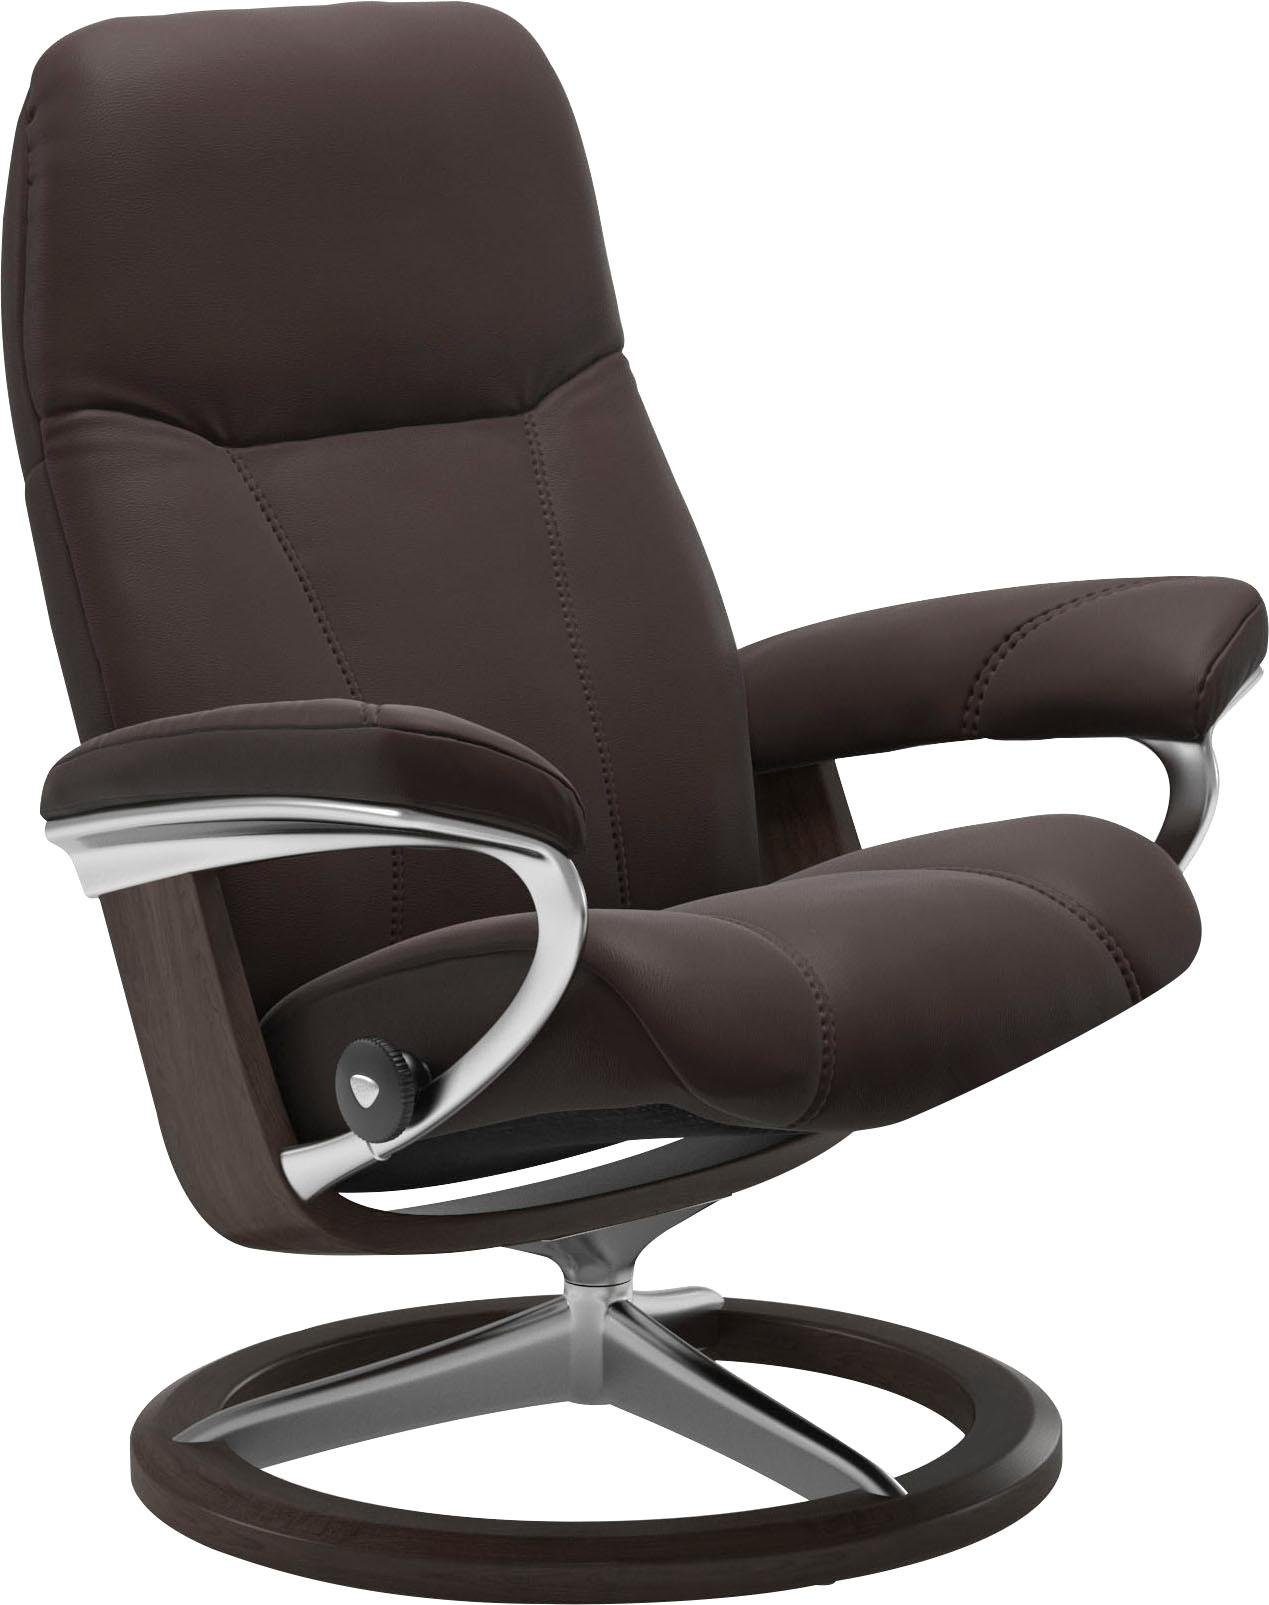 Größe Signature Stressless® S, Consul, Wenge Base, Gestell mit Relaxsessel